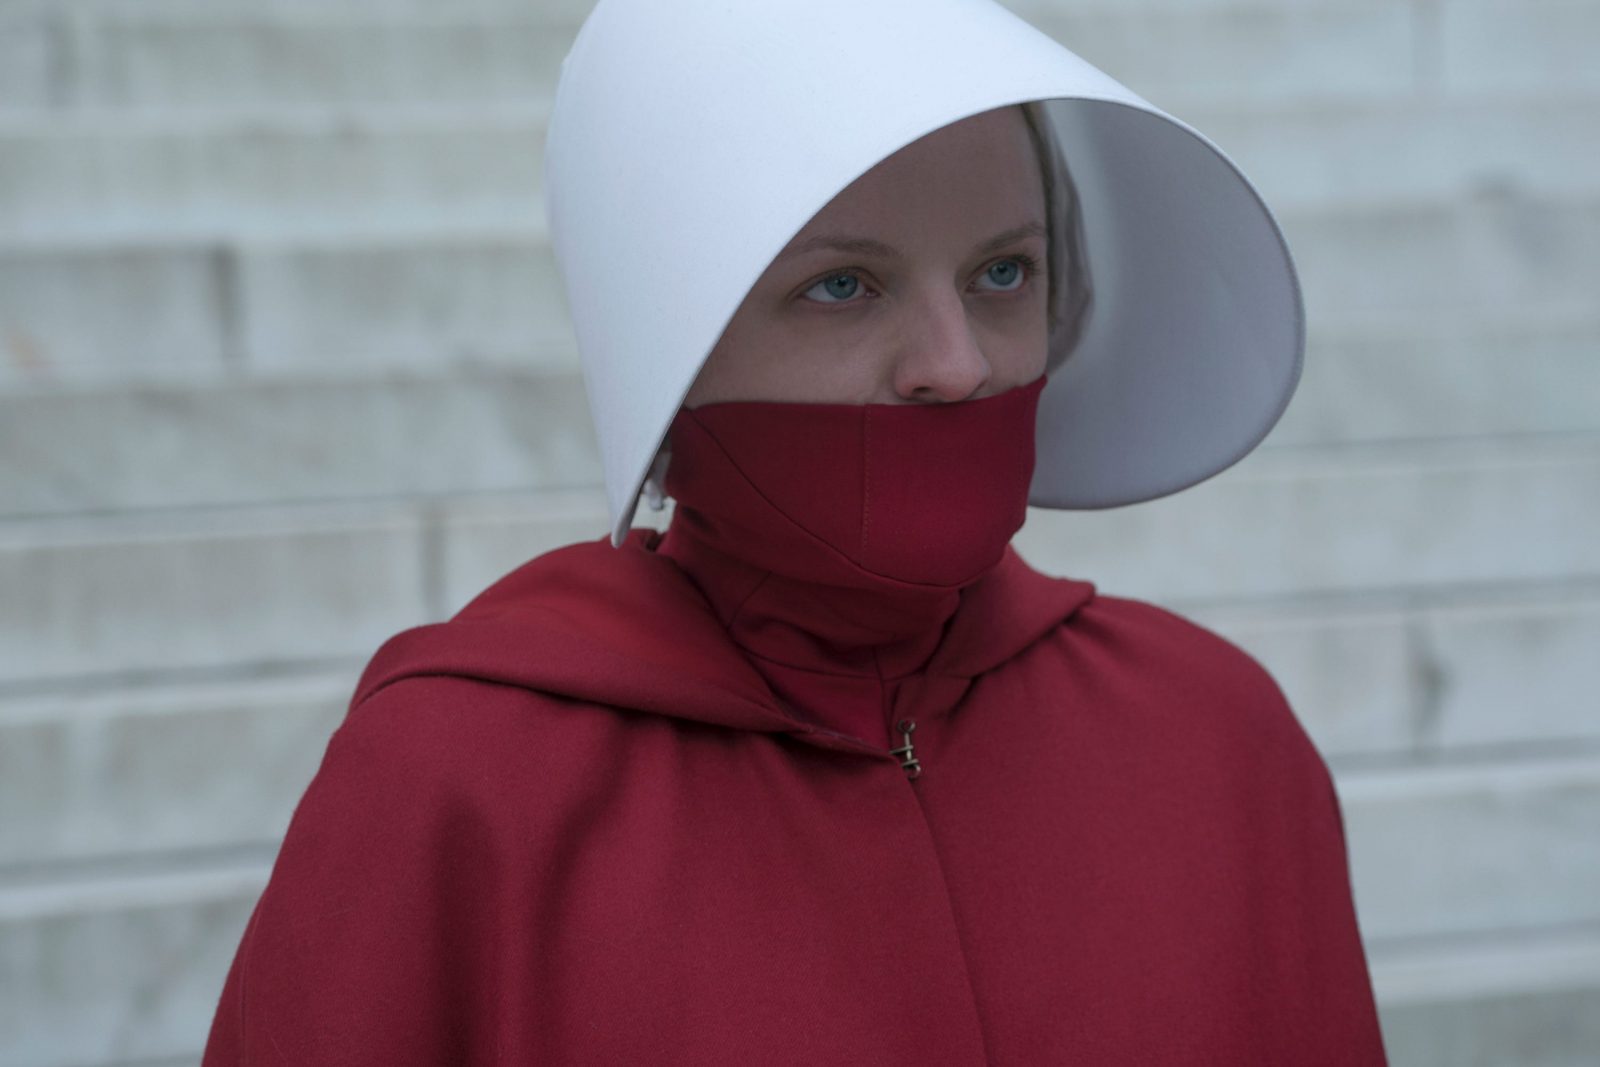 Only Person Who Has Read Enough Books Can Get 15 on This Quiz The Handmaid's Tale